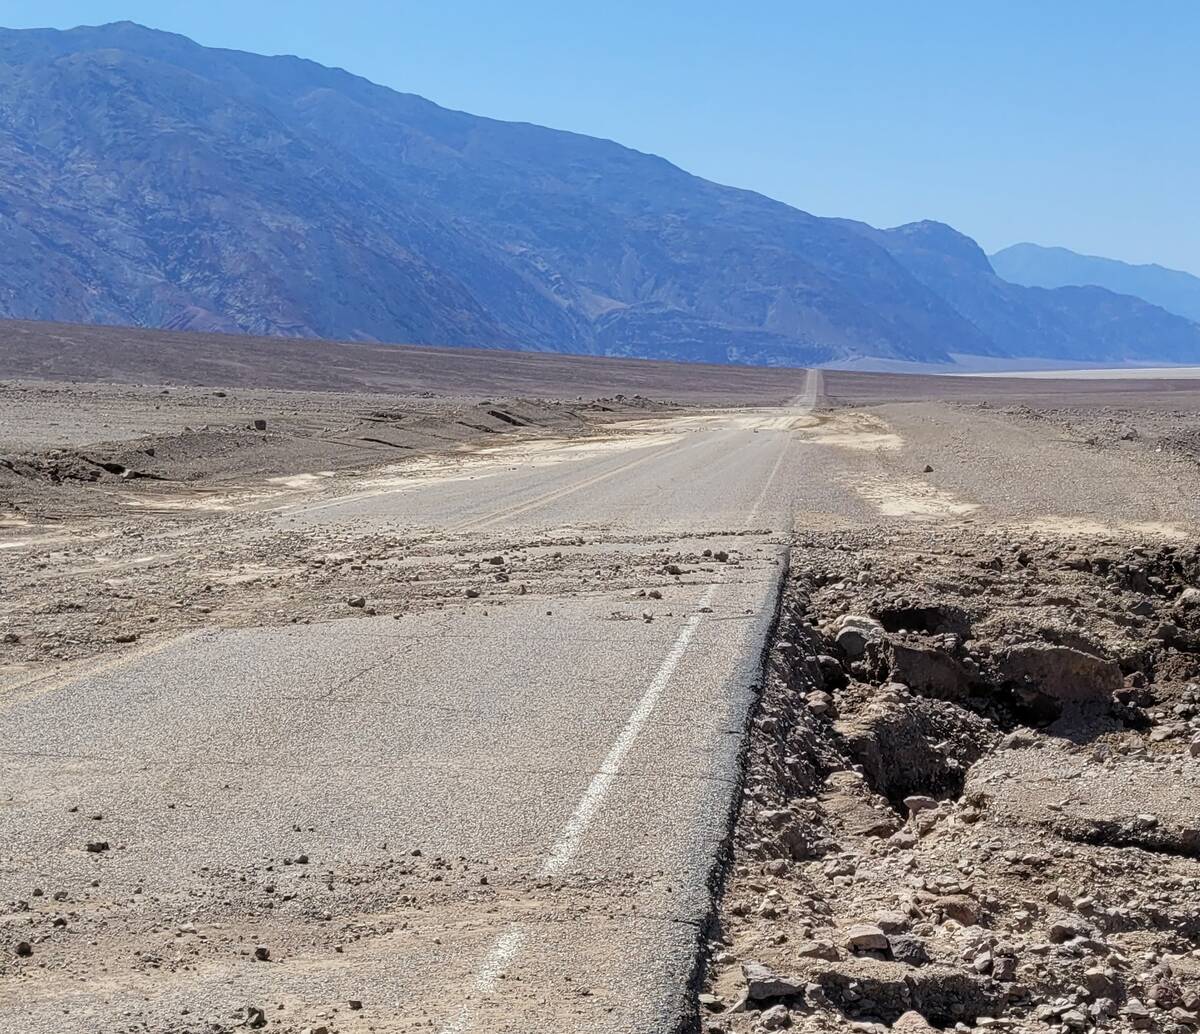 National Park Service Death Valley National Park employees moved dirt and rocks off the road an ...